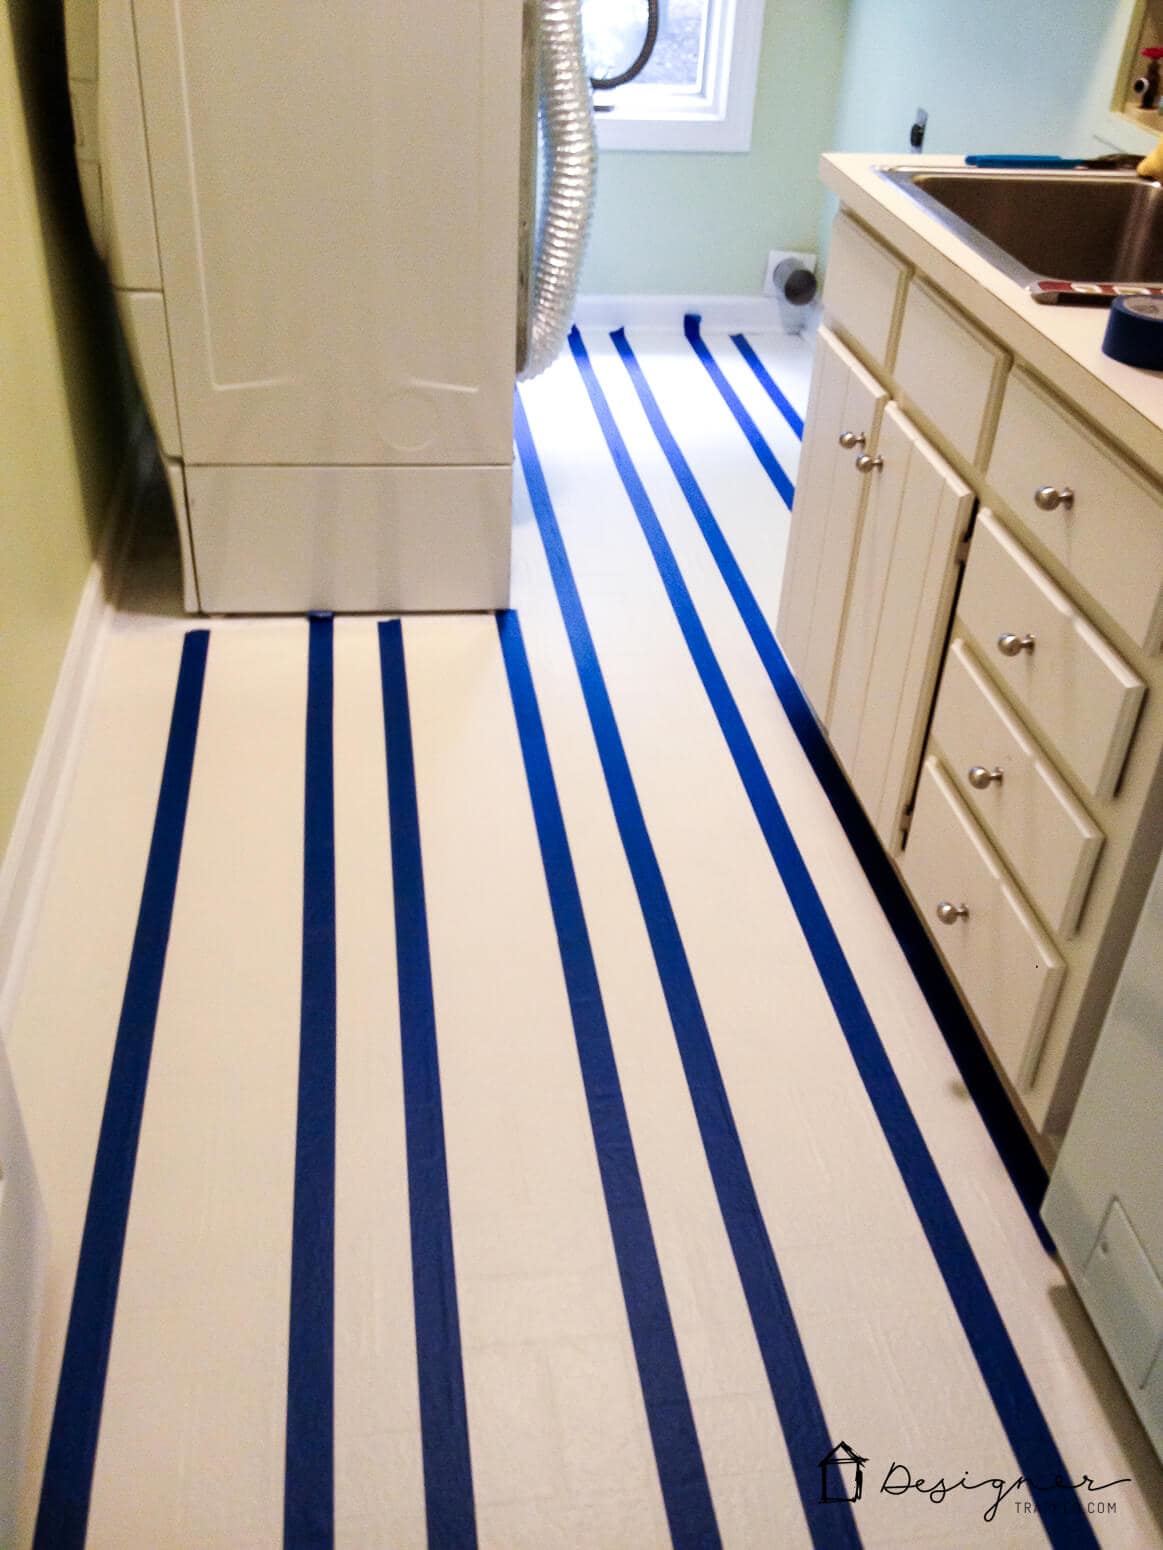 You don't have to live with old, outdated vinyl floors! You can learn how to paint vinyl floors in a way that will last for YEARS with this step-by-step tutorial. Click to read it!